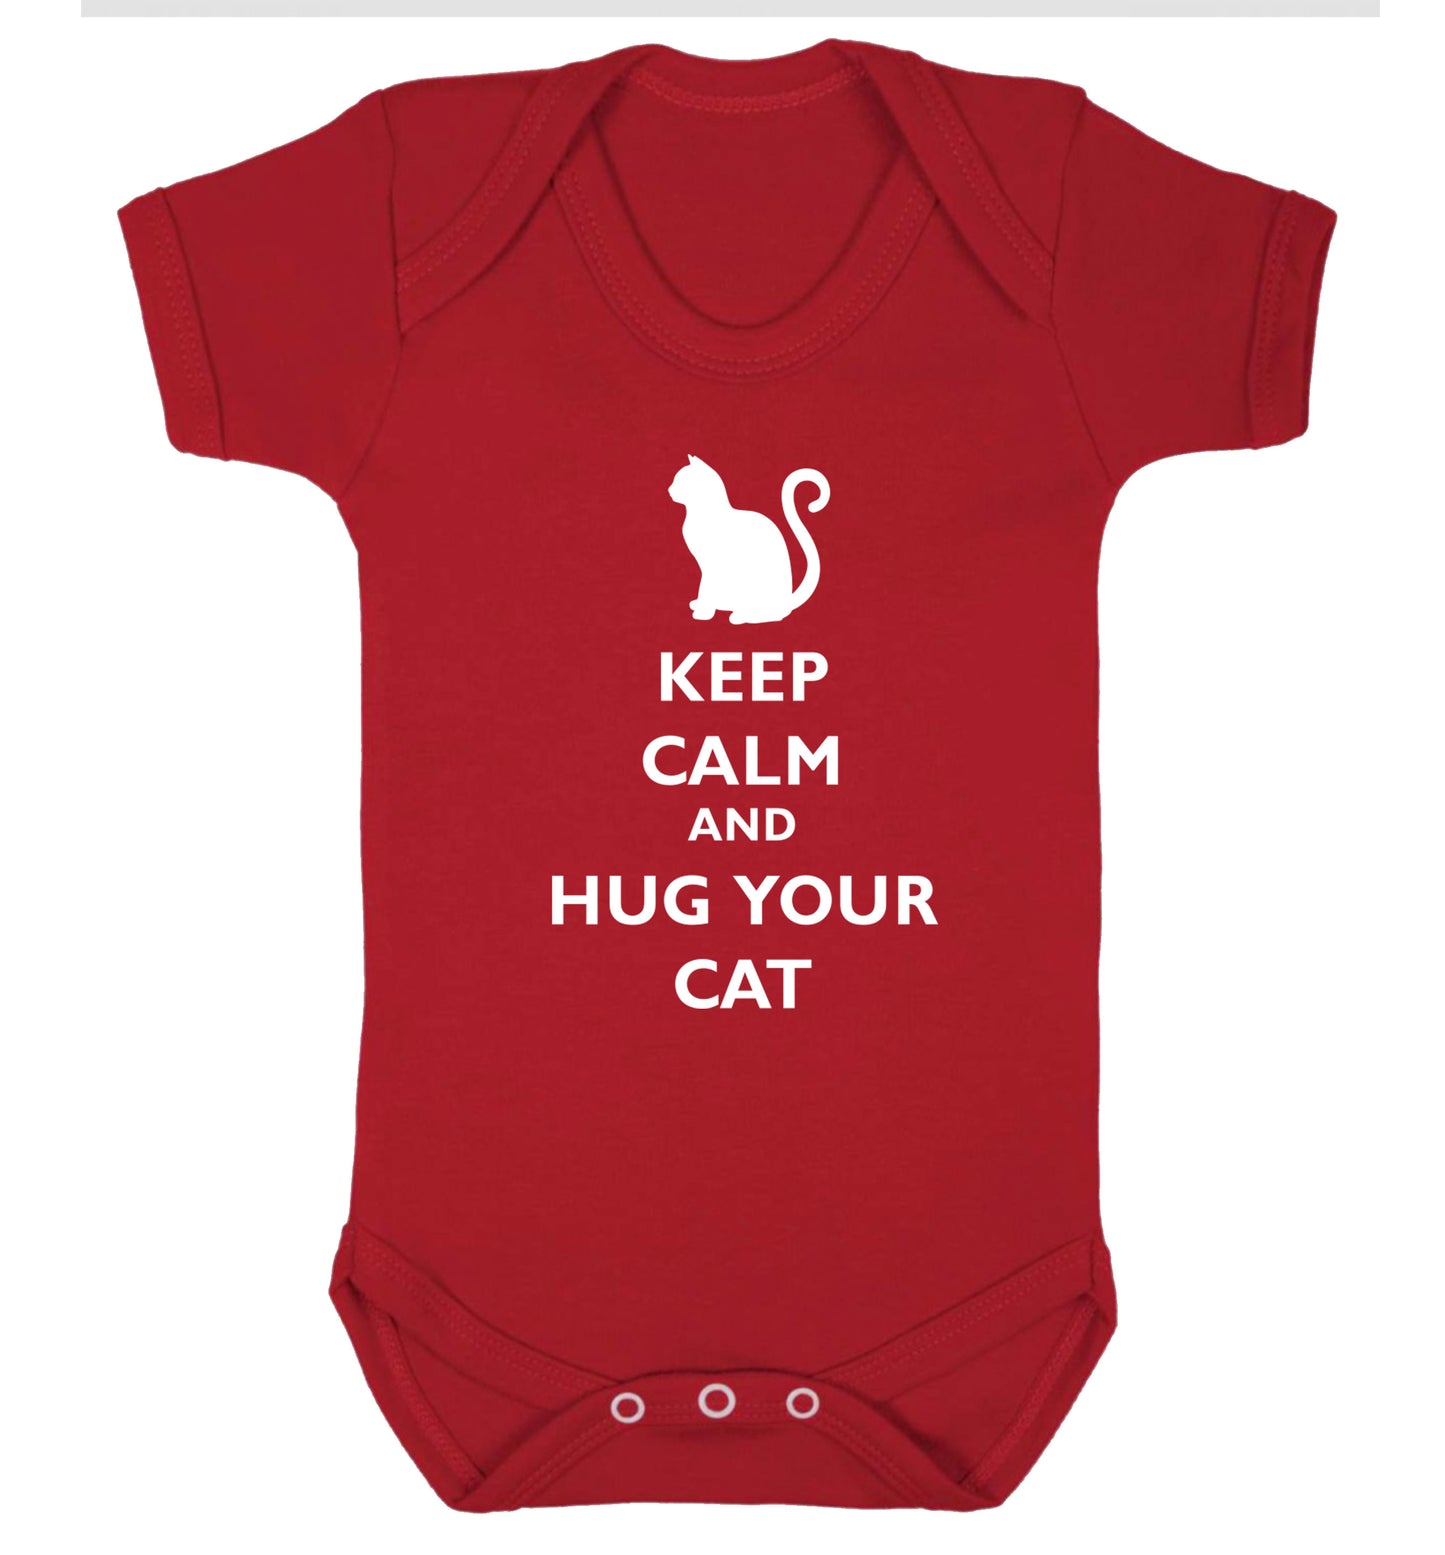 Keep calm and hug your cat Baby Vest red 18-24 months